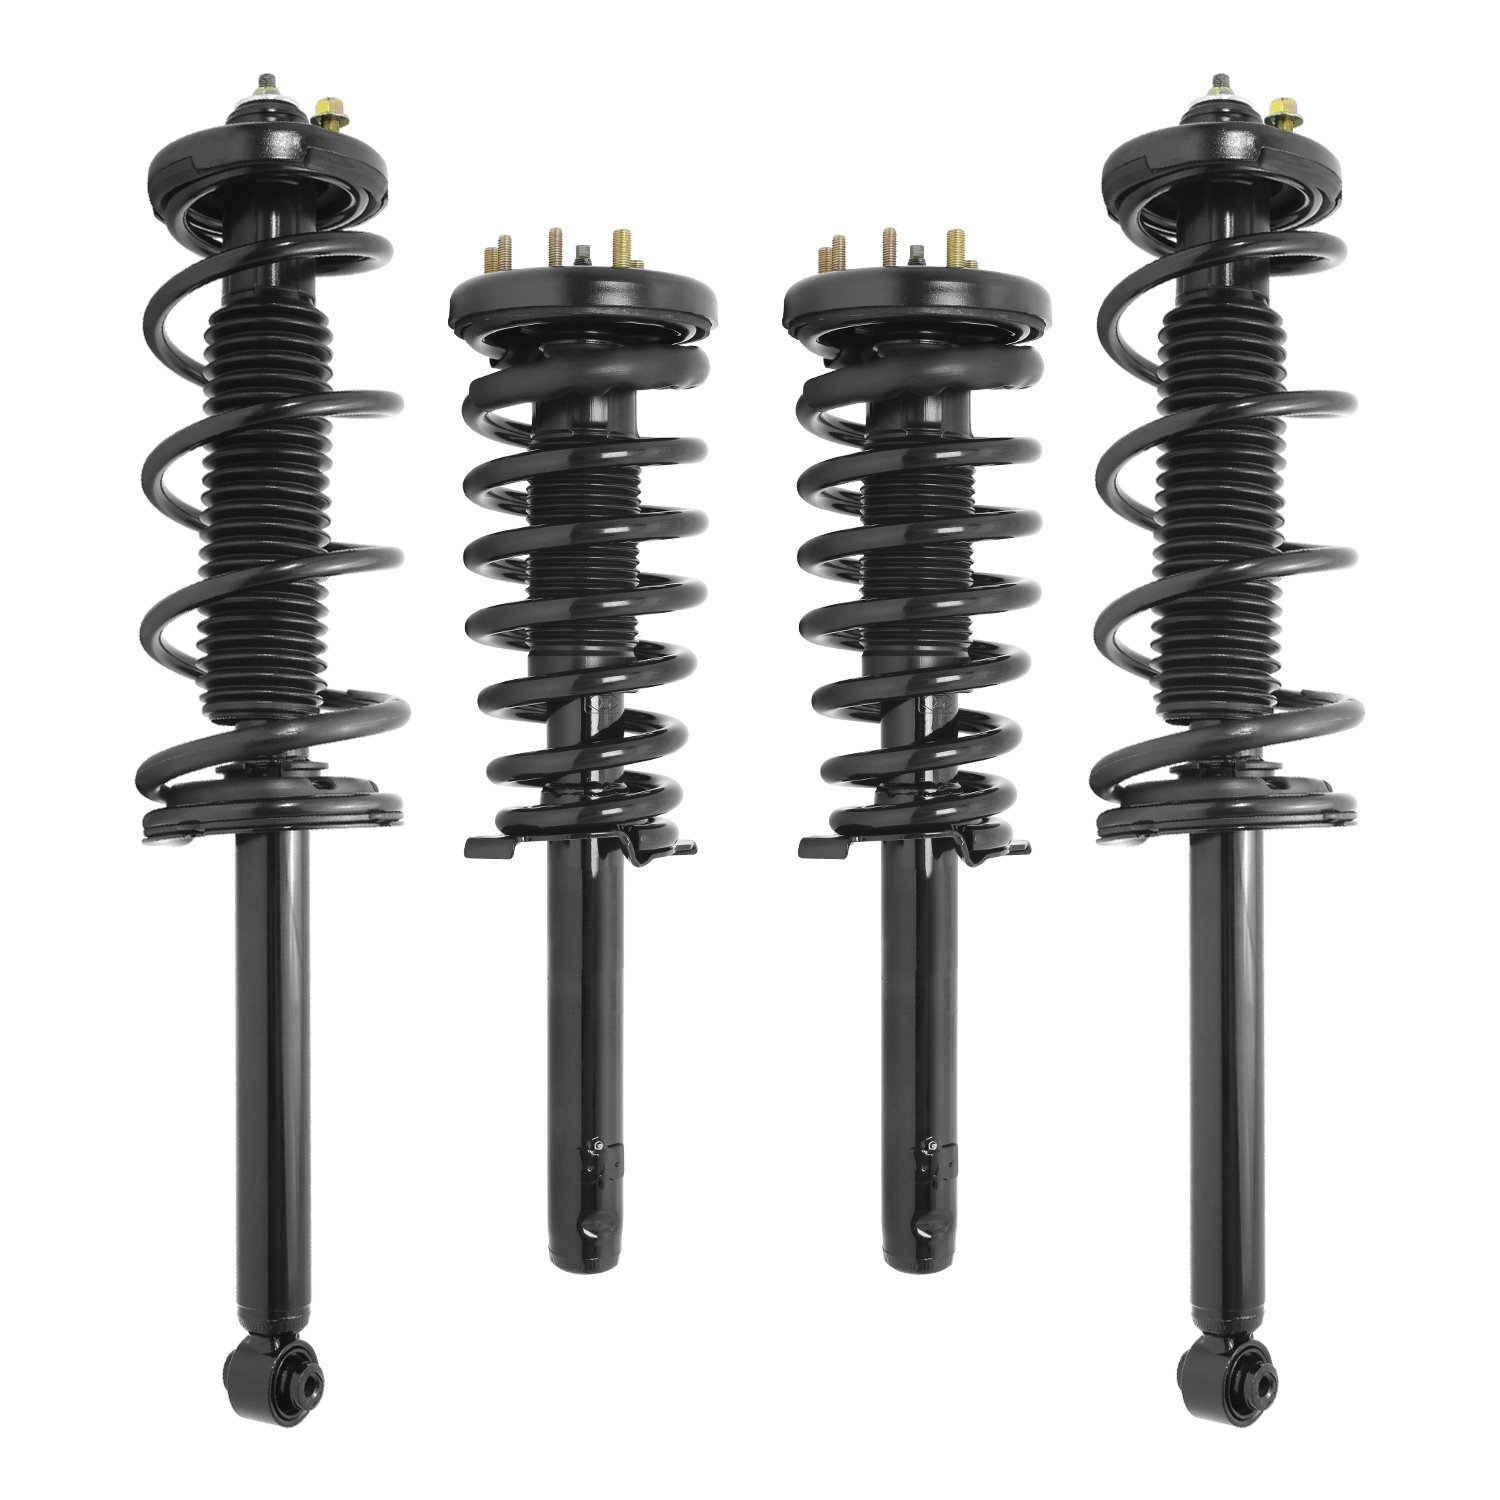 4-11951-15100-001 Front & Rear Suspension Strut & Coil Spring Assembly Kit Fits Select Acura TL